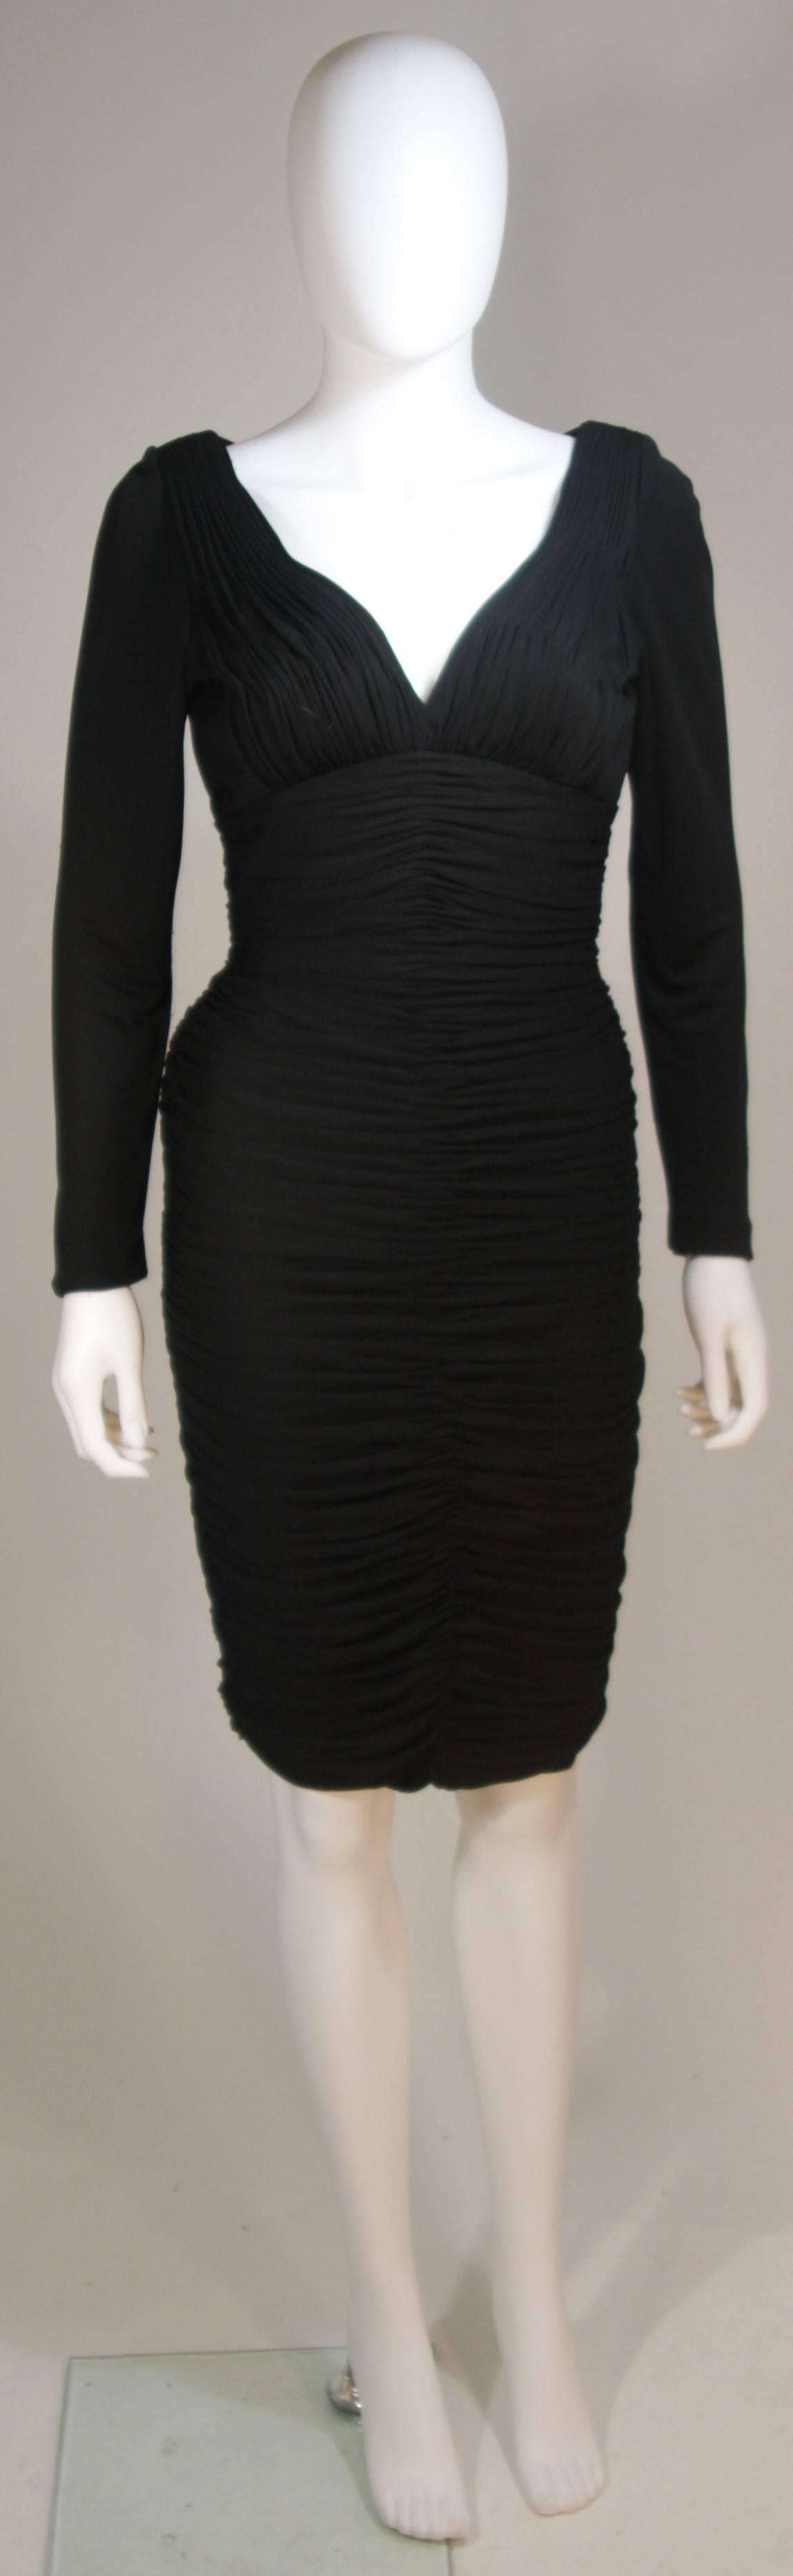  This Vicky Tiel  cocktail dress is composed of a black jersey. This dress features long sleeves and rouching. There is a center back zipper and boning details. In excellent great vintage condition, some pulls. 

  **Please cross-reference